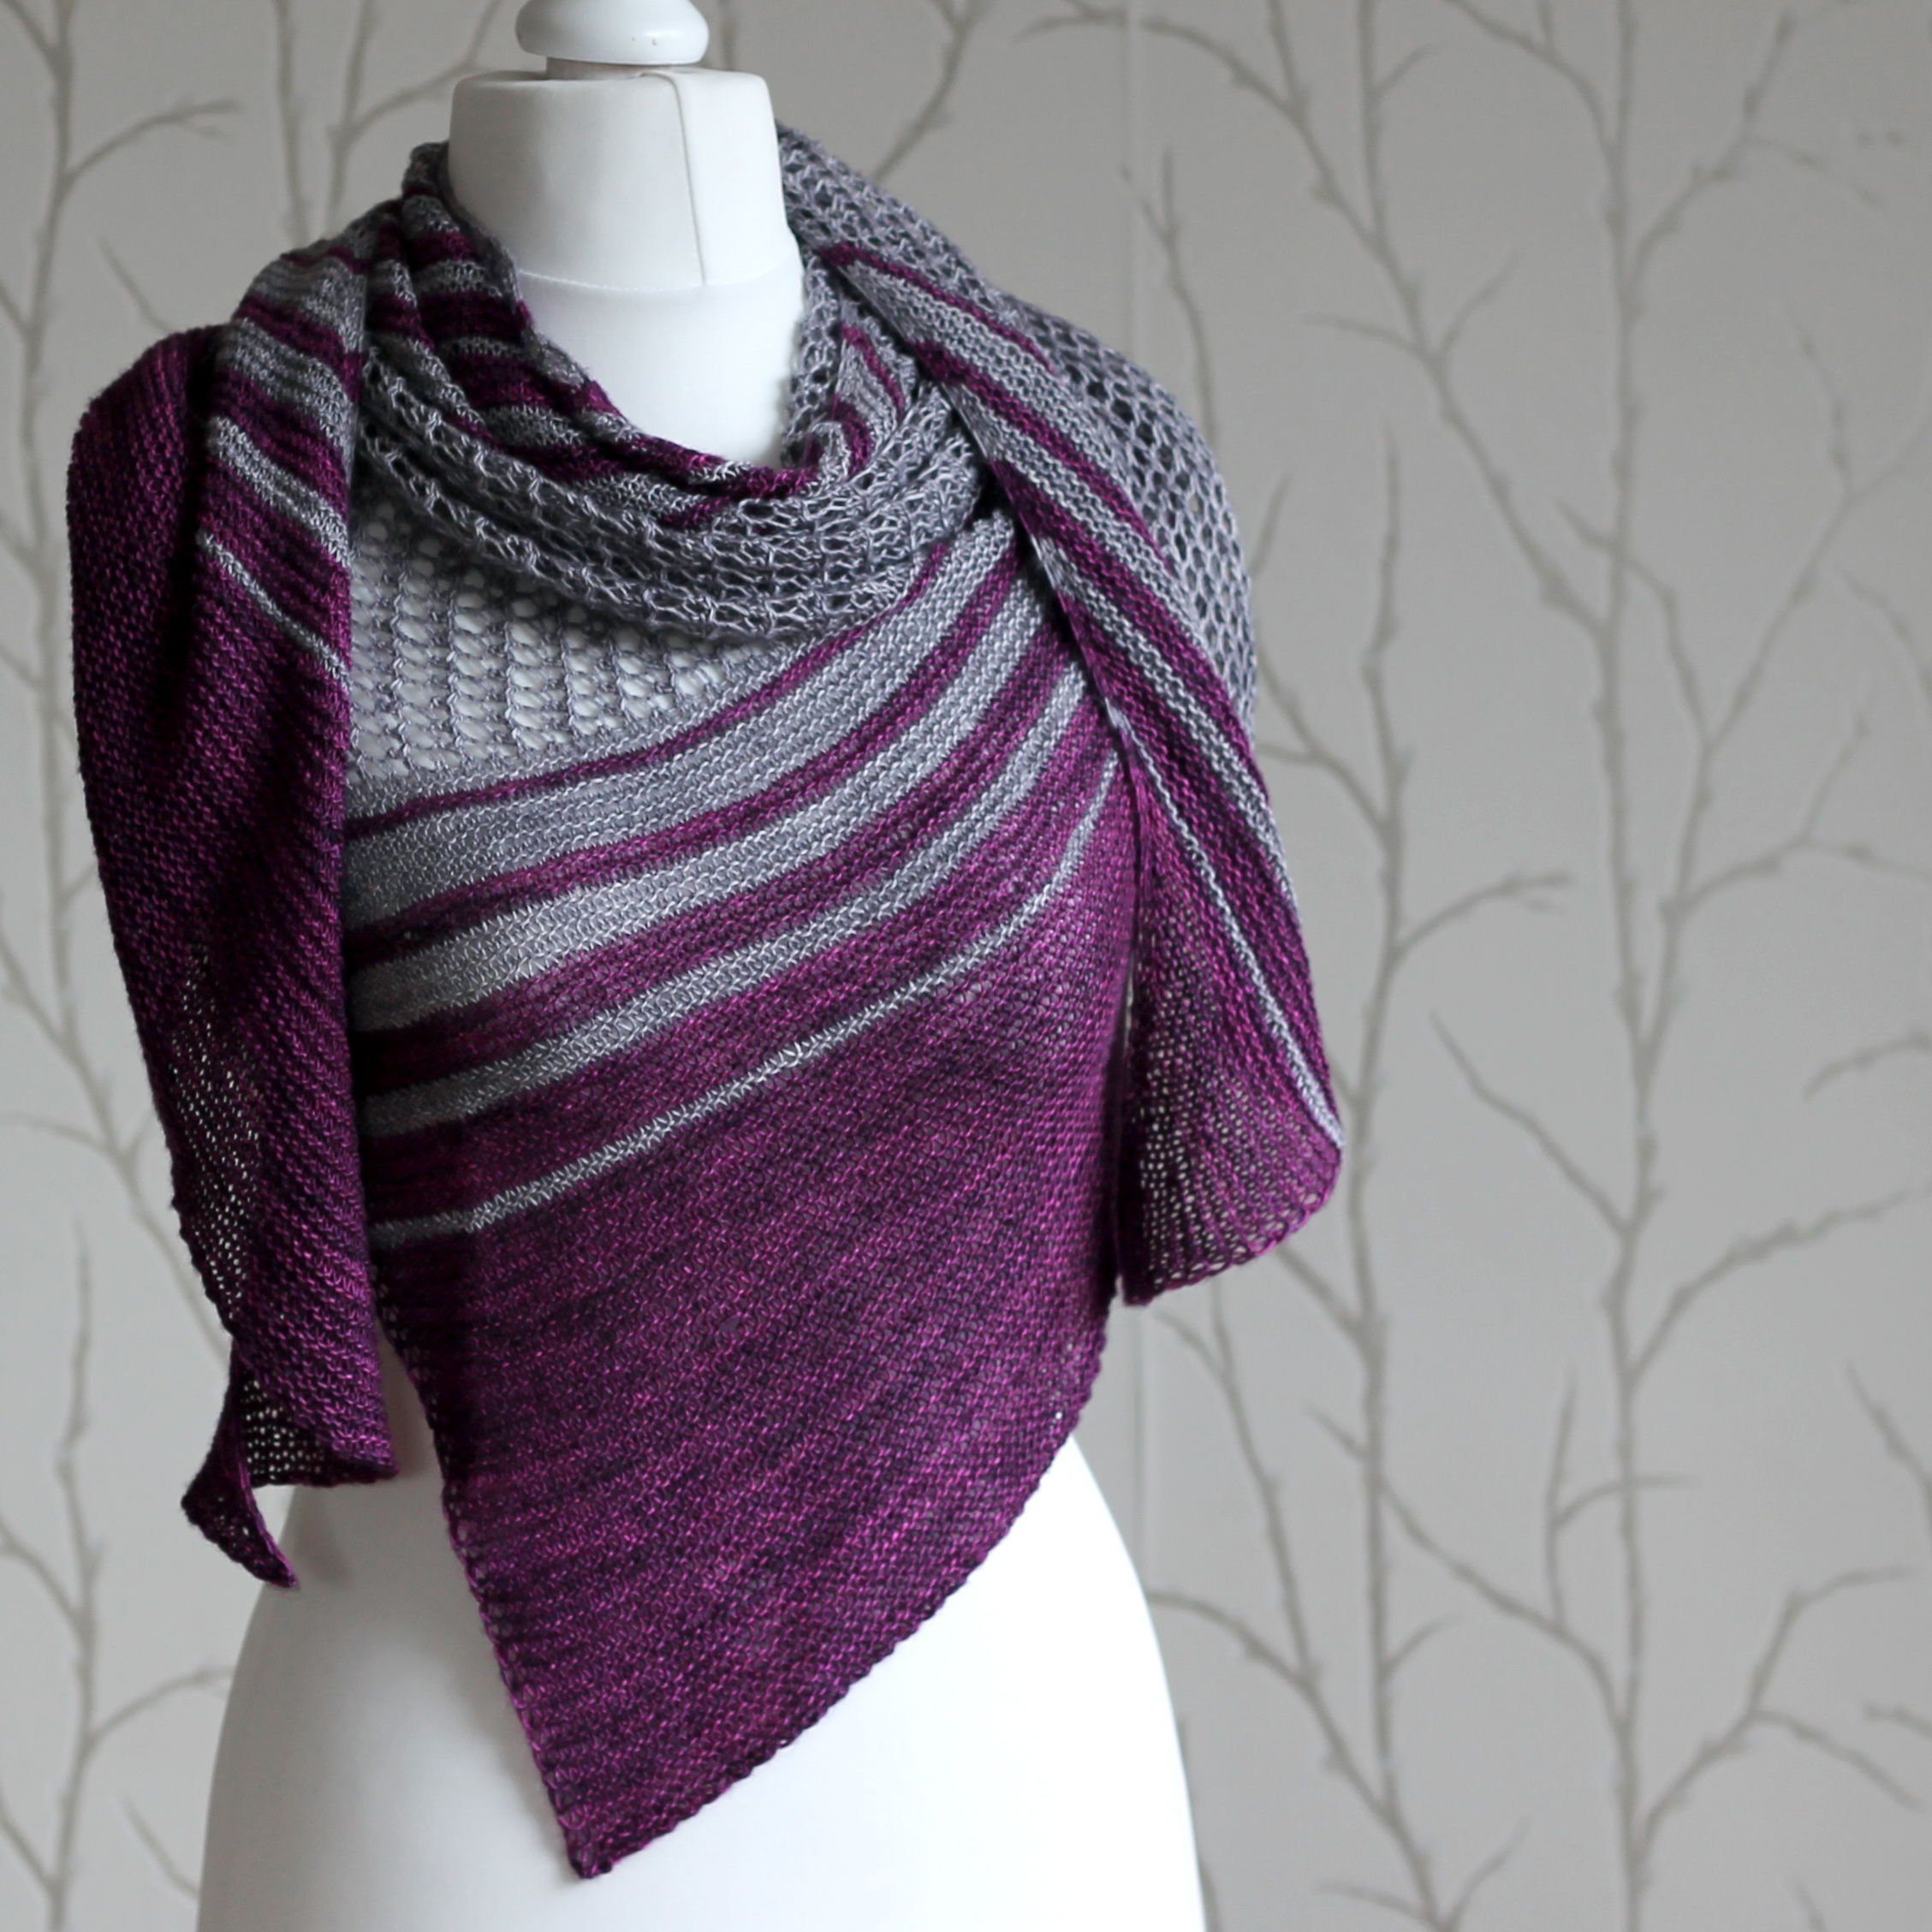 A purple and grey striped shawl with lace panels draped around a mannequin